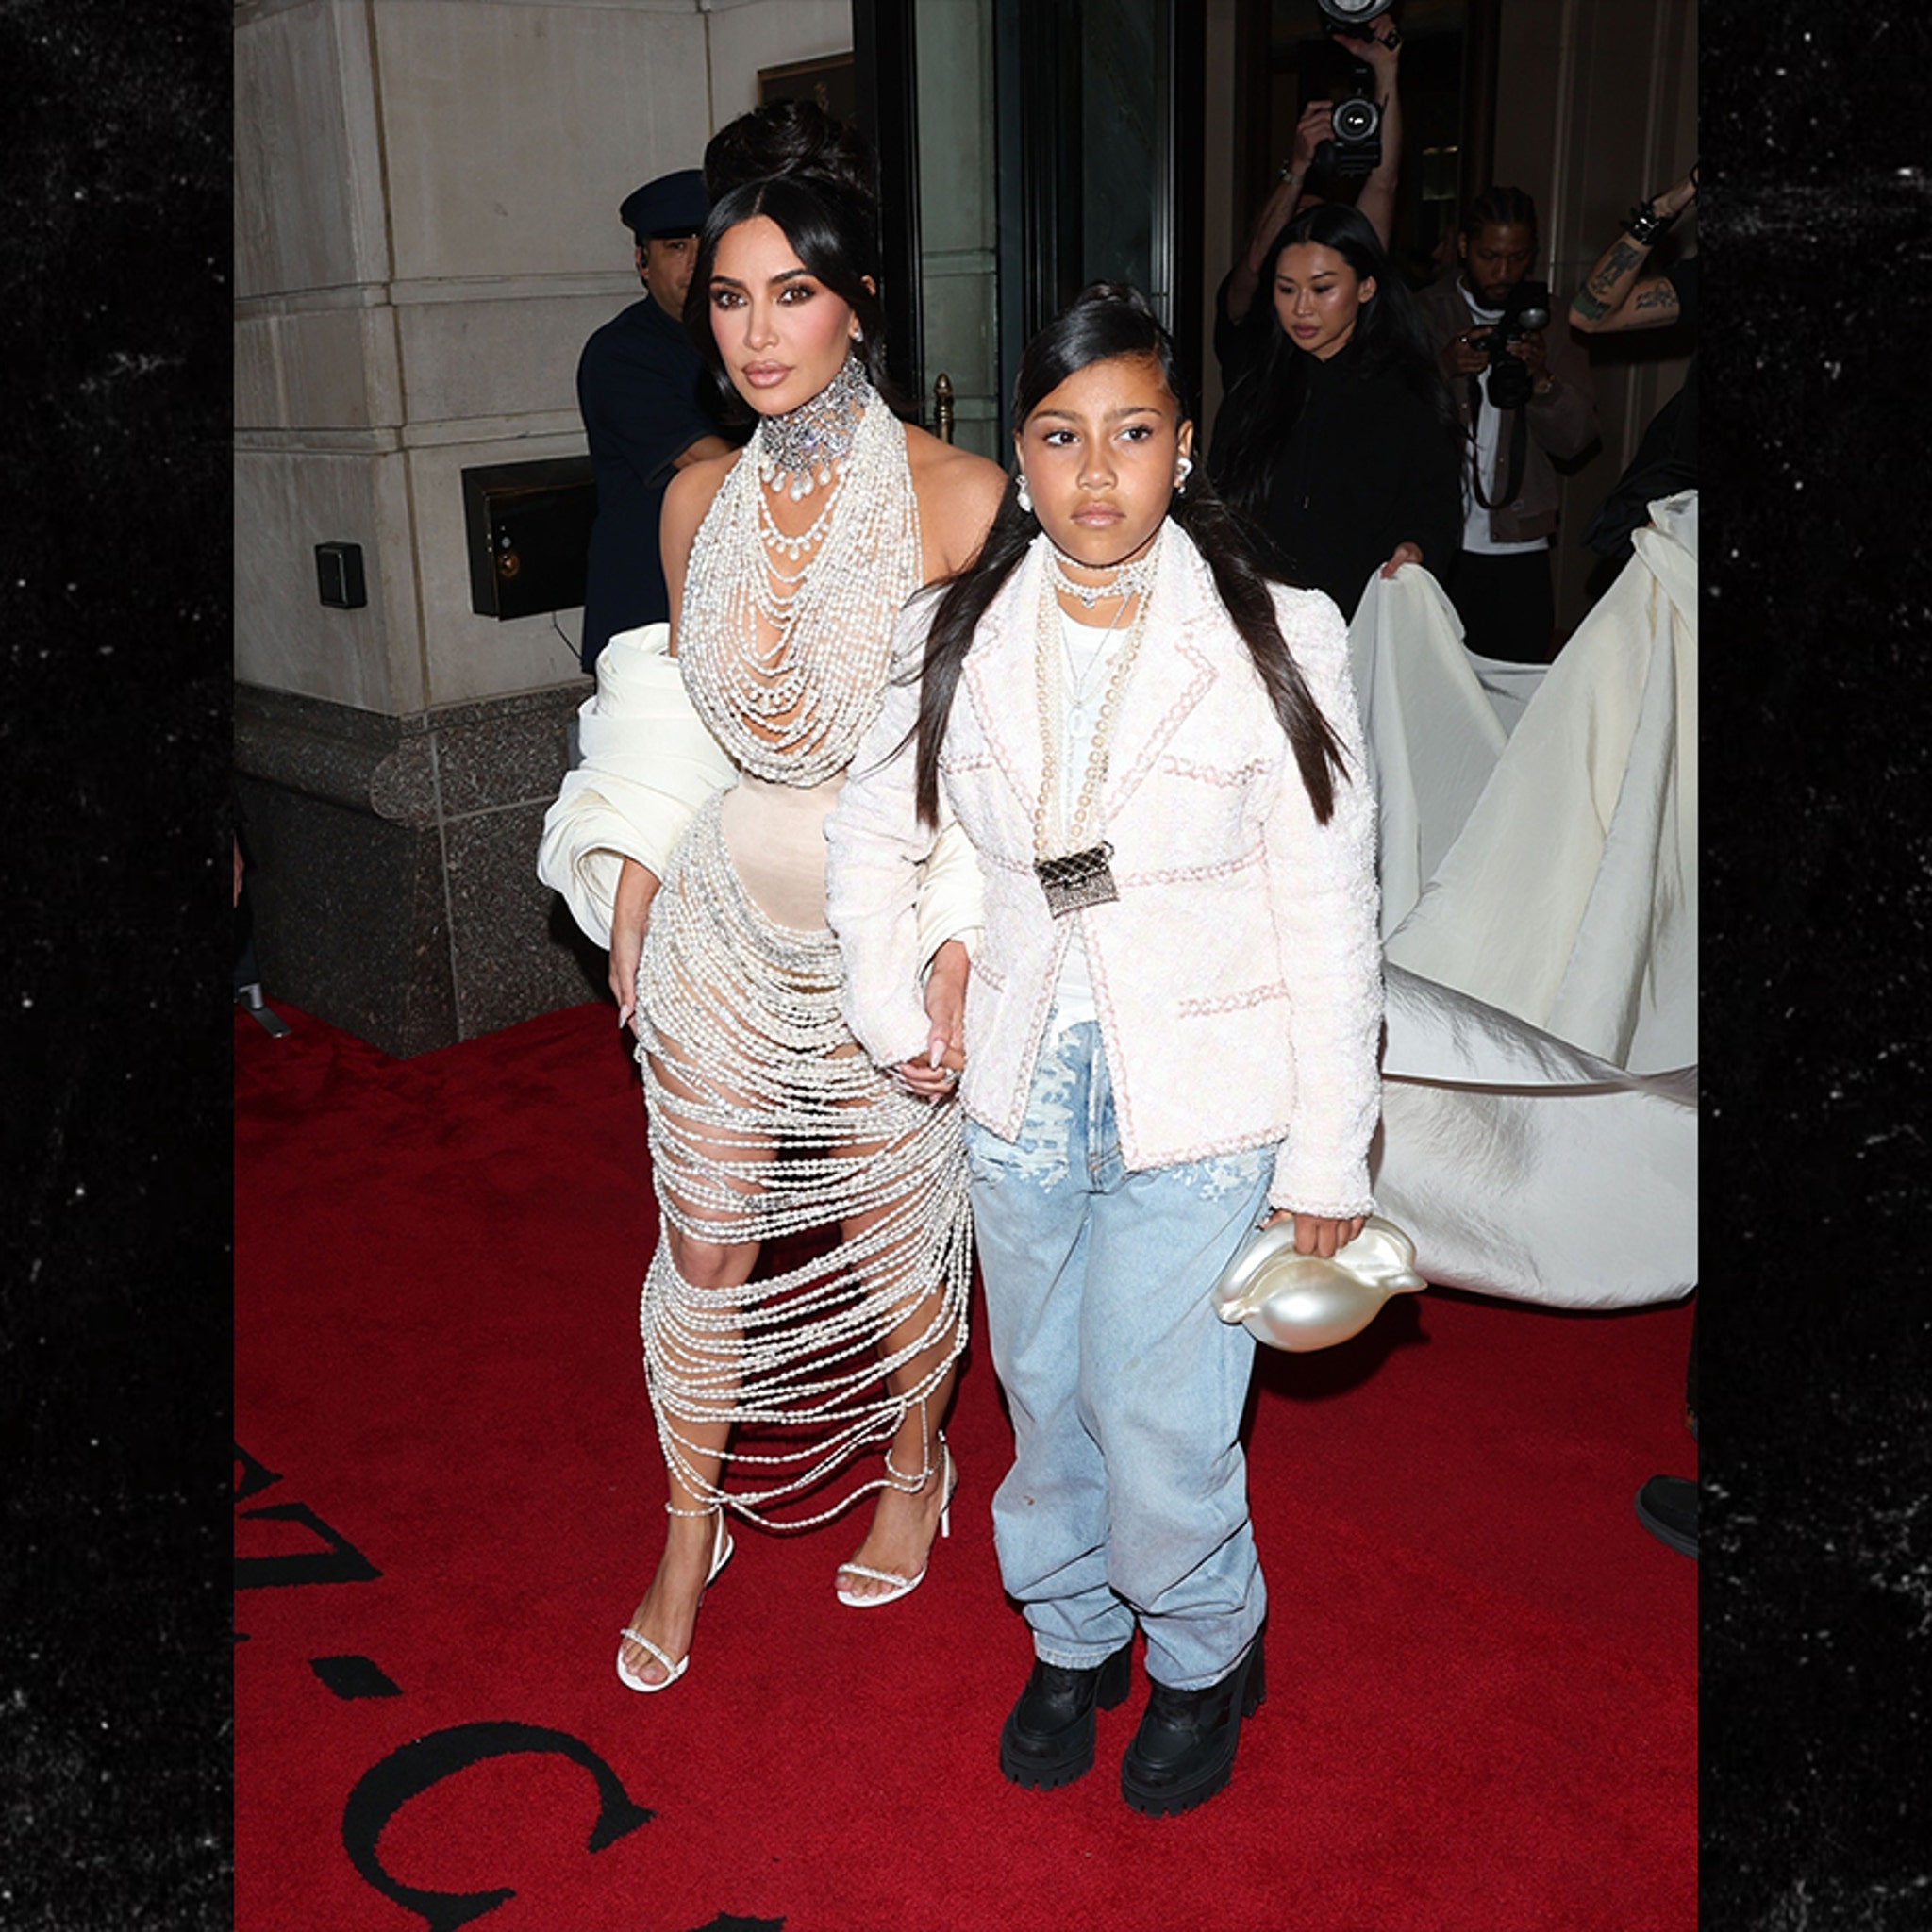 Kim Kardashian and North West arrived for the #MetGala2023